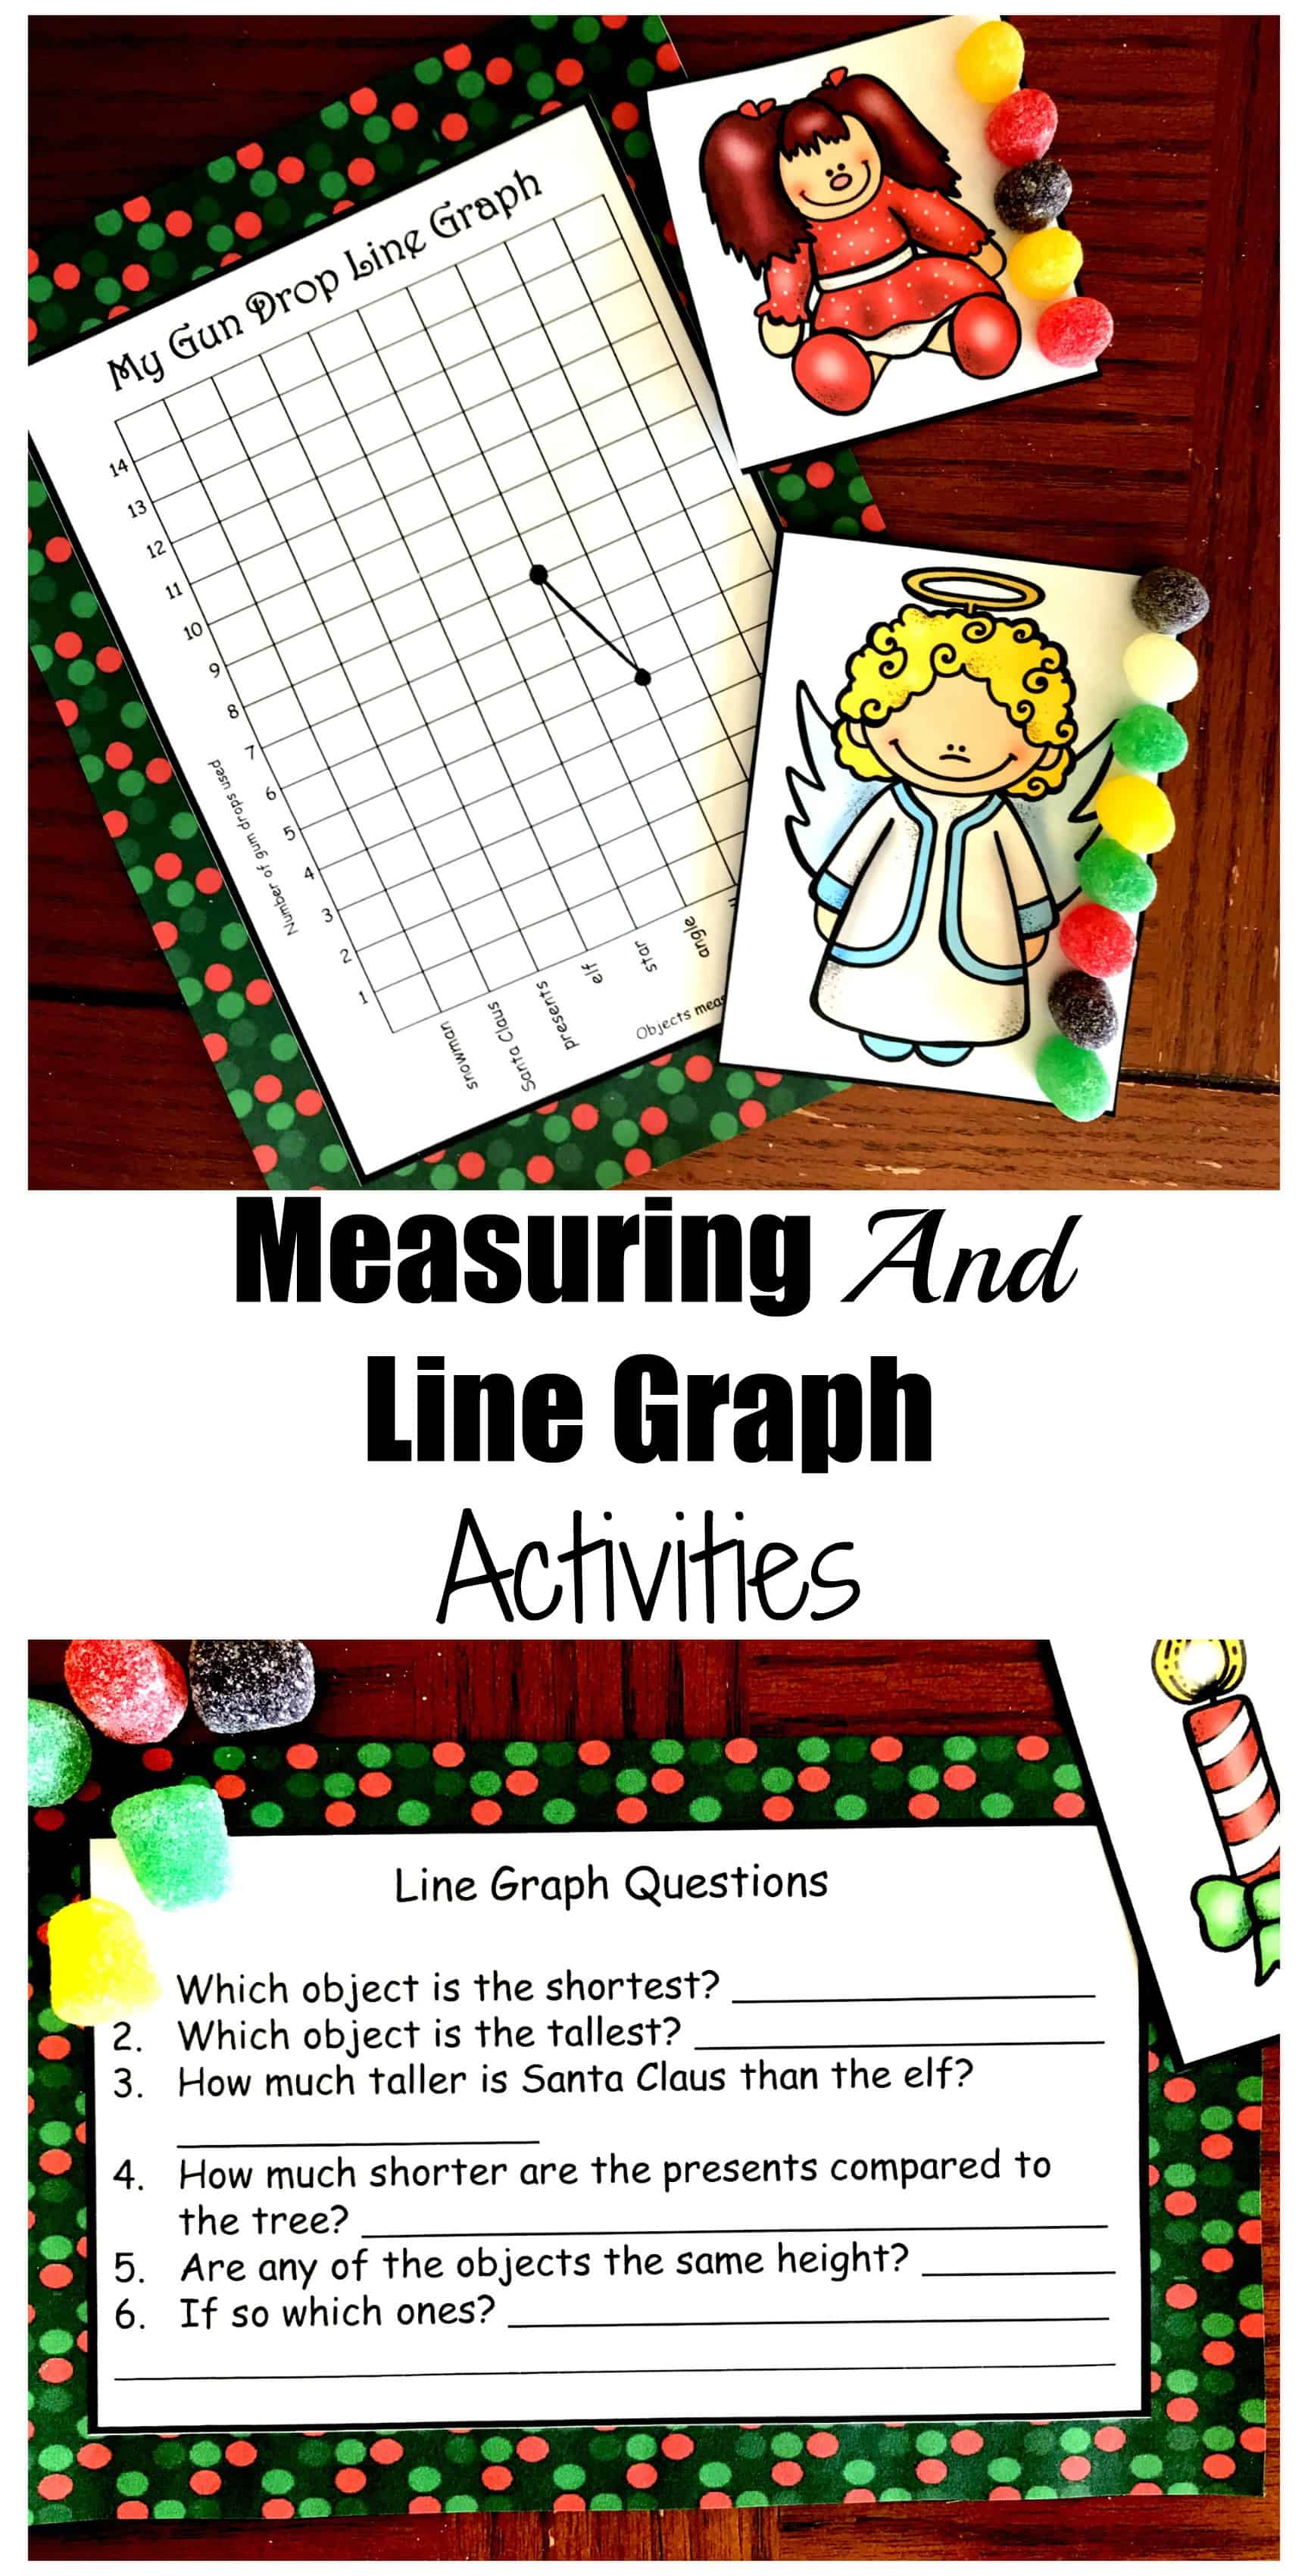 This free Christmas Measuring and Line Graph Activity is a great way to work on graphing and measuring objects to the nearest unit.